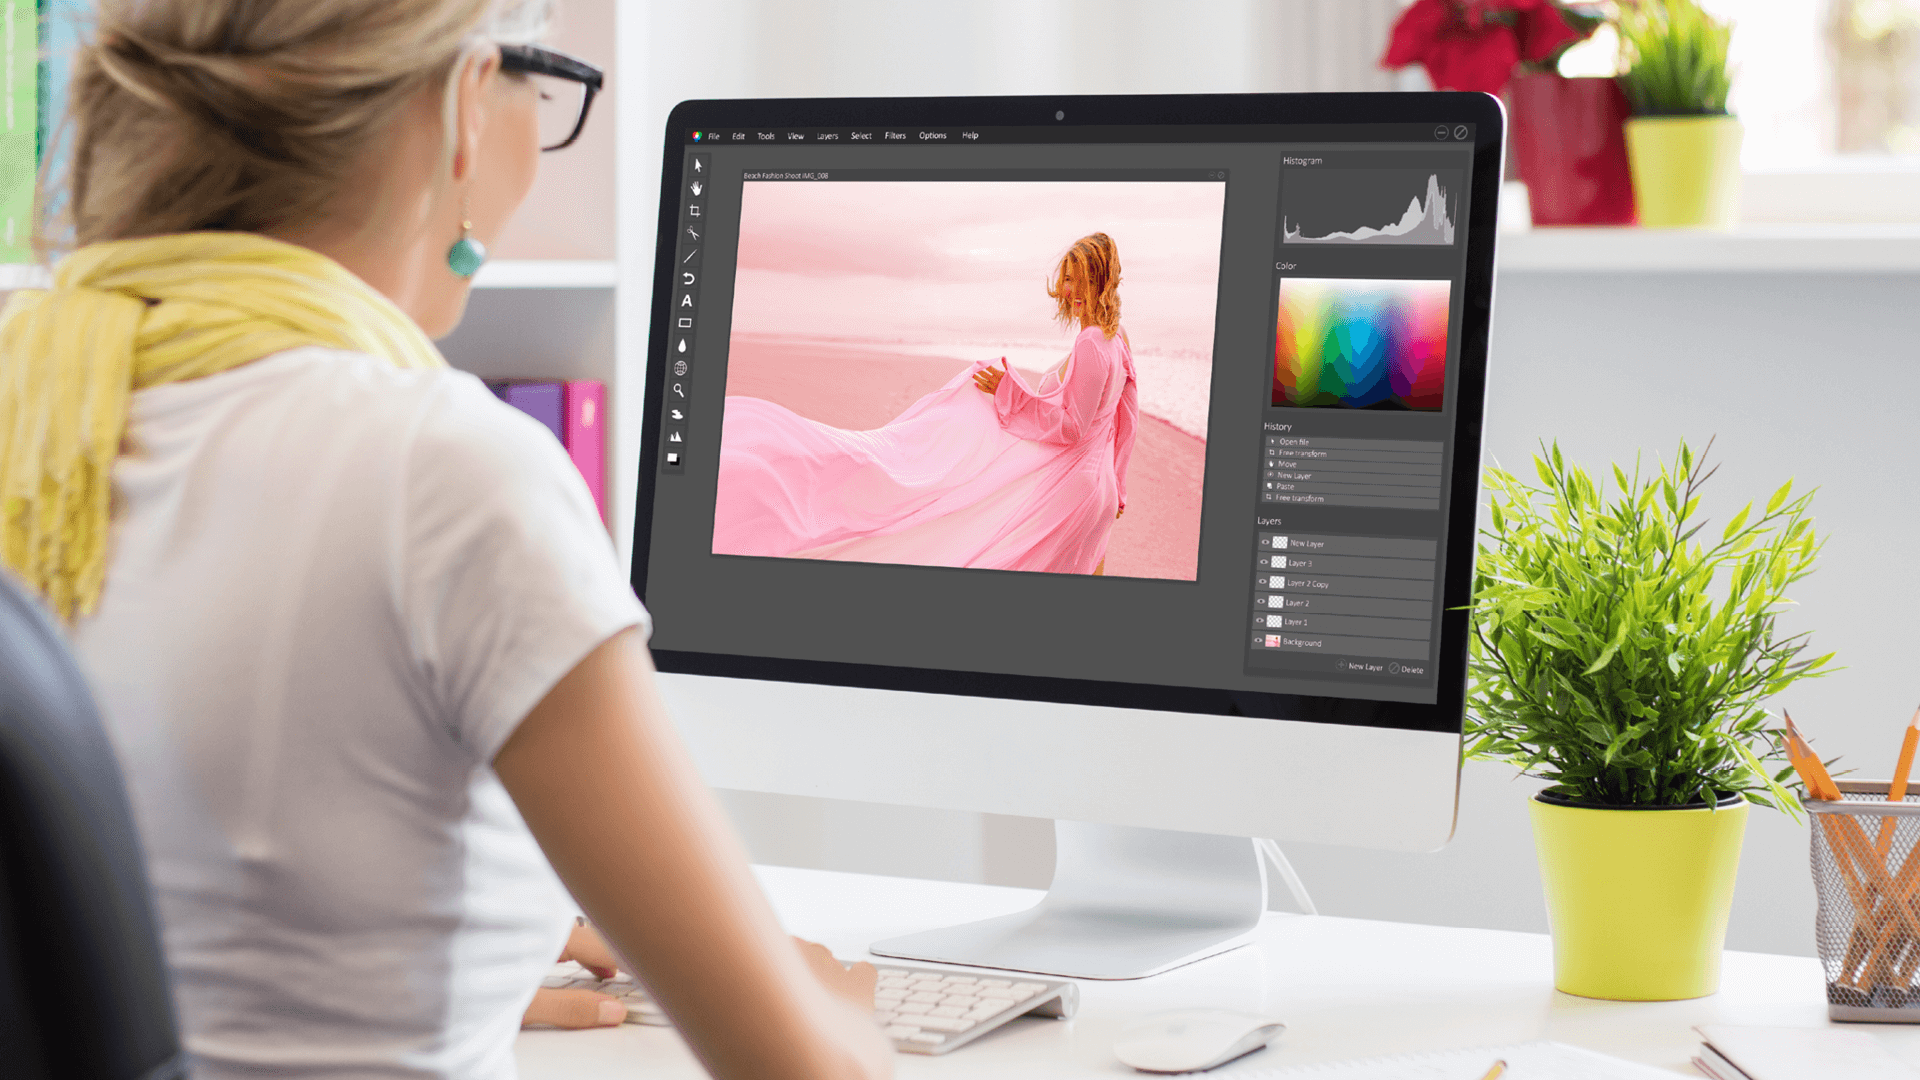 LEARN: What to Know About Applying Image Filters in Adobe Photoshop